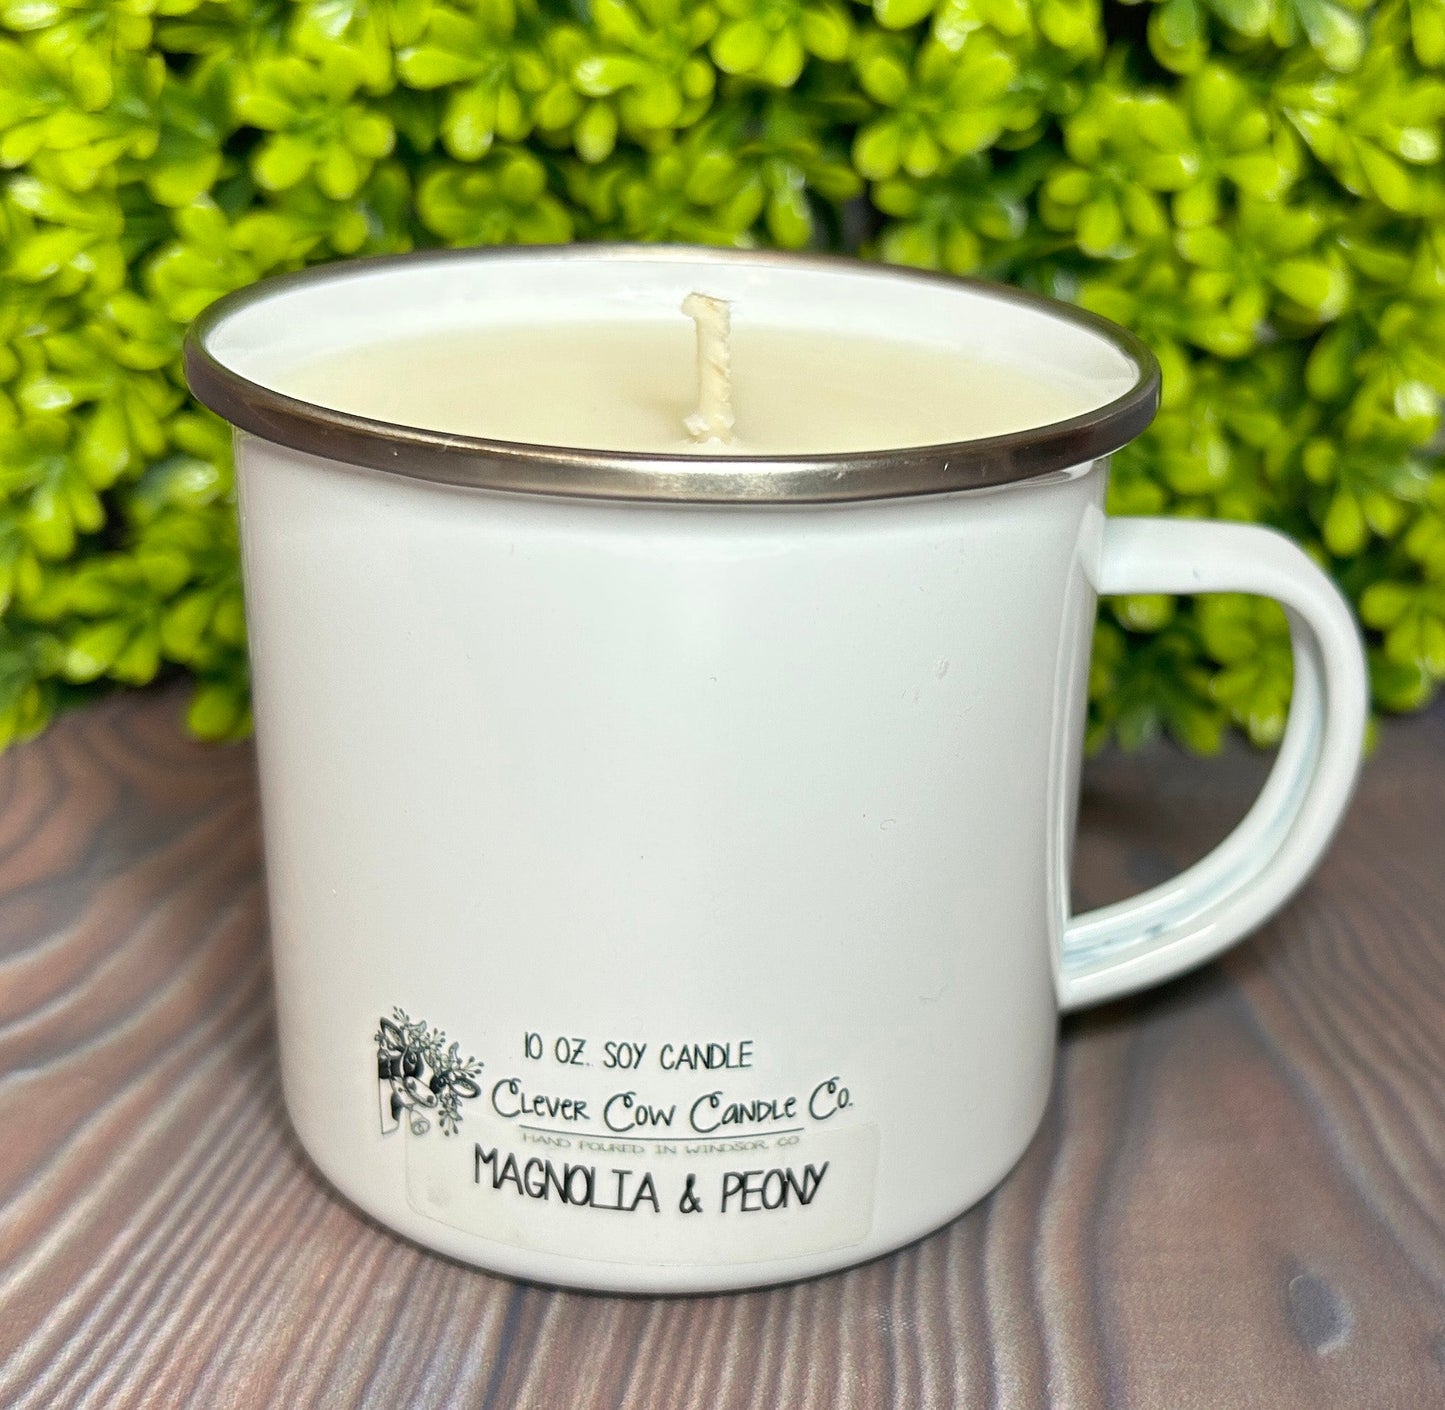 Wholesale Enamel Mug Candle -  Create Your Own Happiness - QTY 3 CANDLES